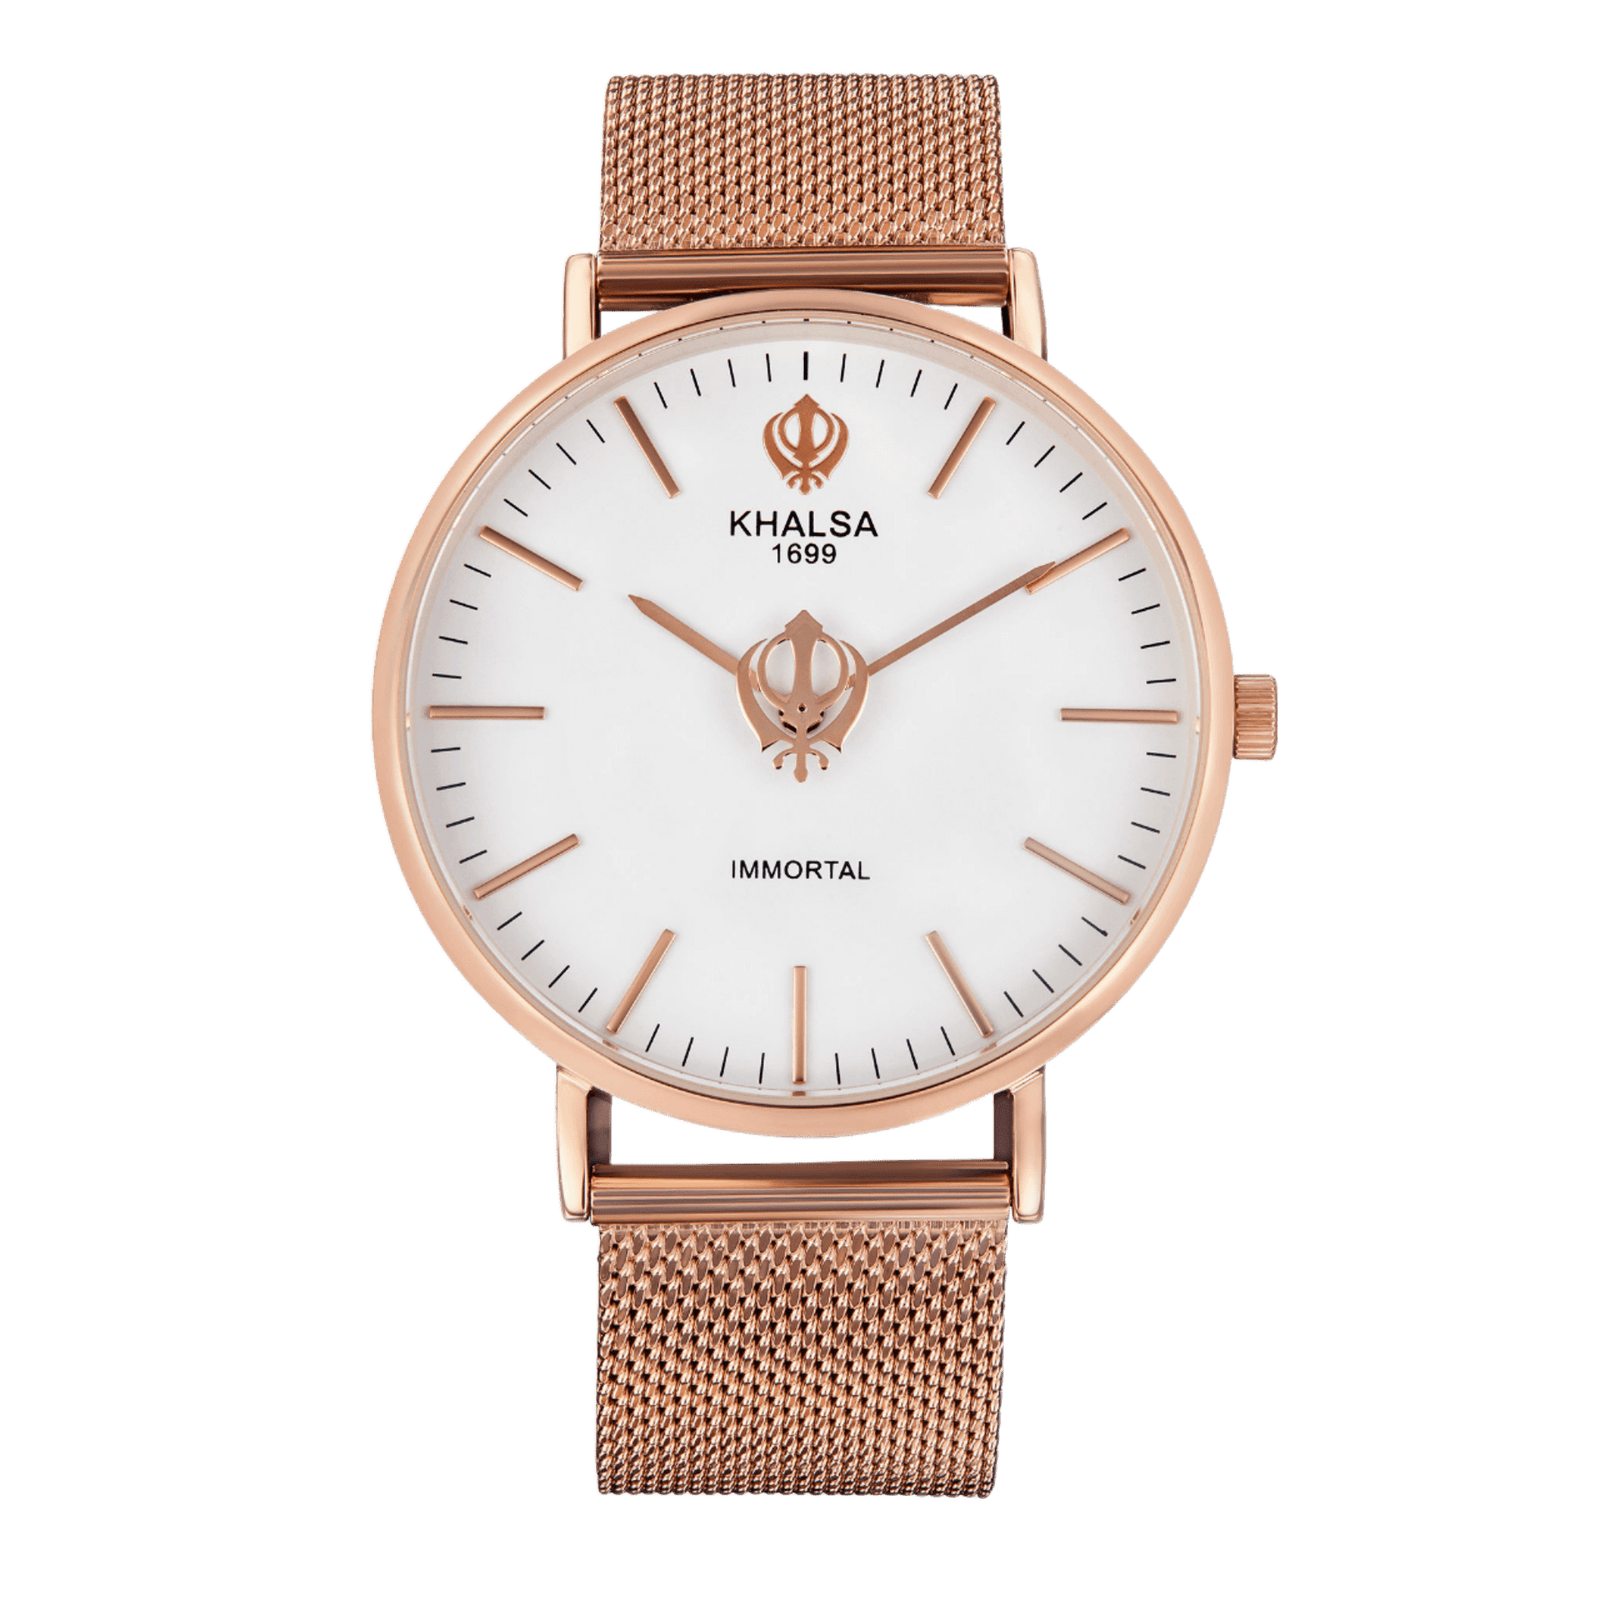 House of Khalsa IMMORTAL Gold White Sikh Watch with Khanda Symbol, Sun Dial and Stainless Steel Gold Strap - Elegant and Stylish